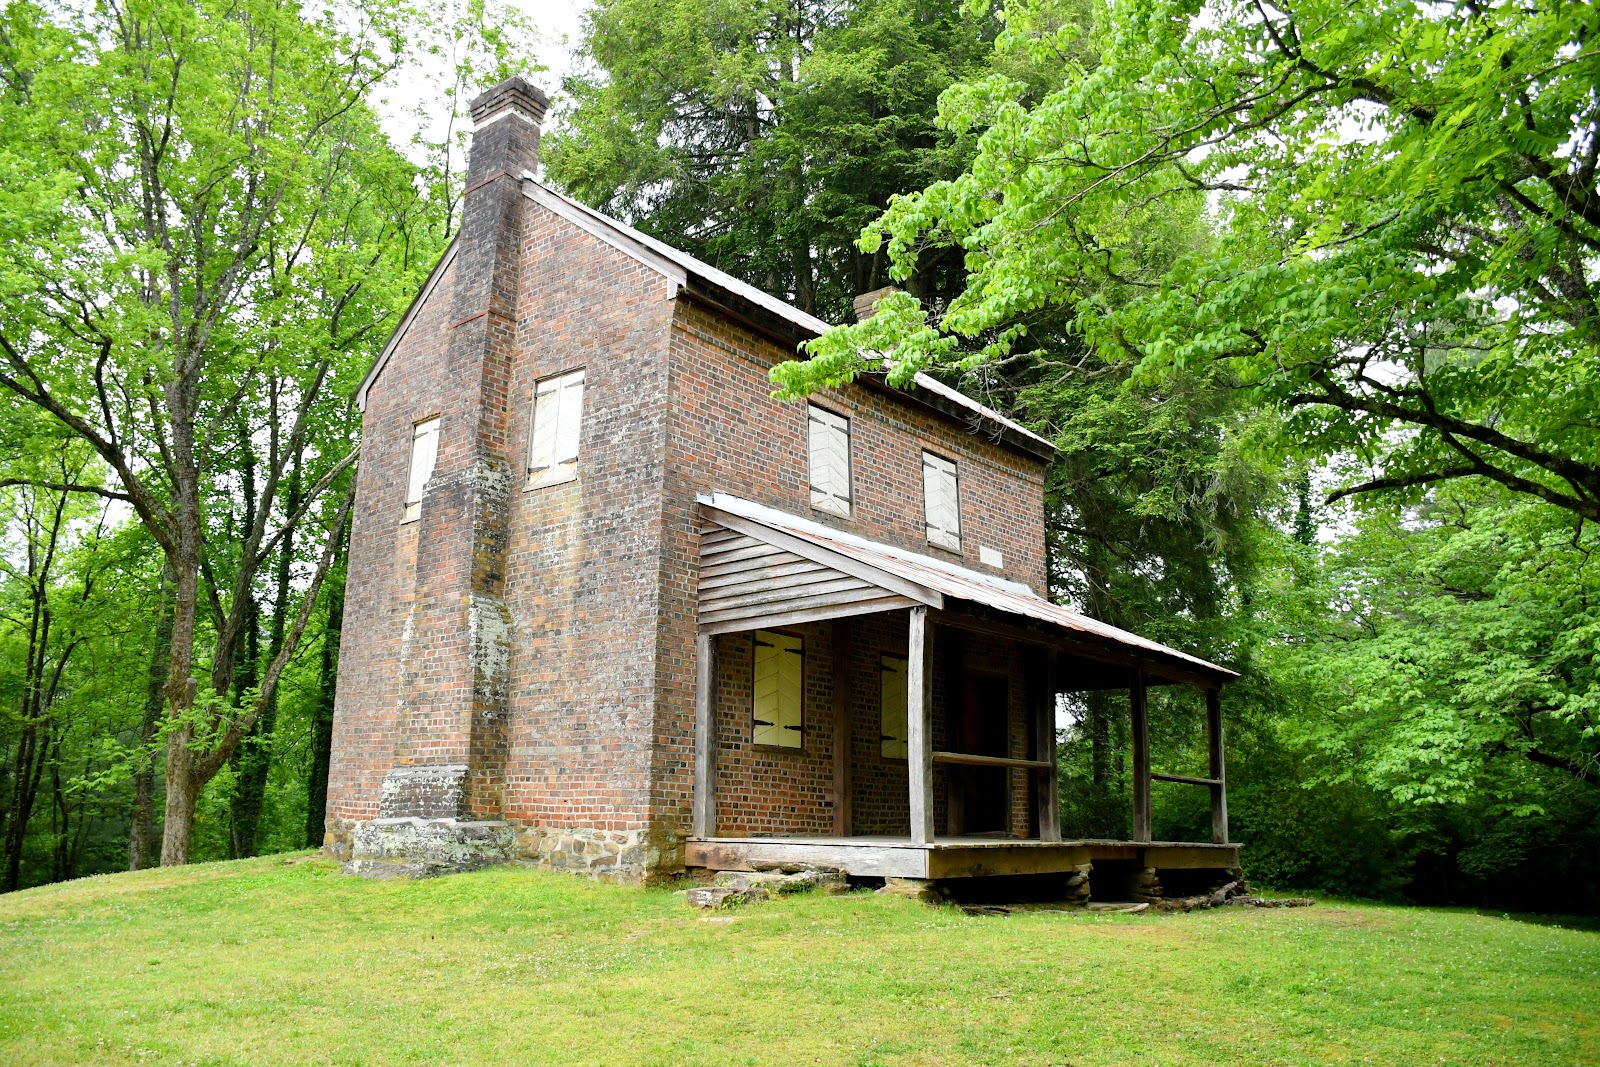 Oconee Station State Historic Site